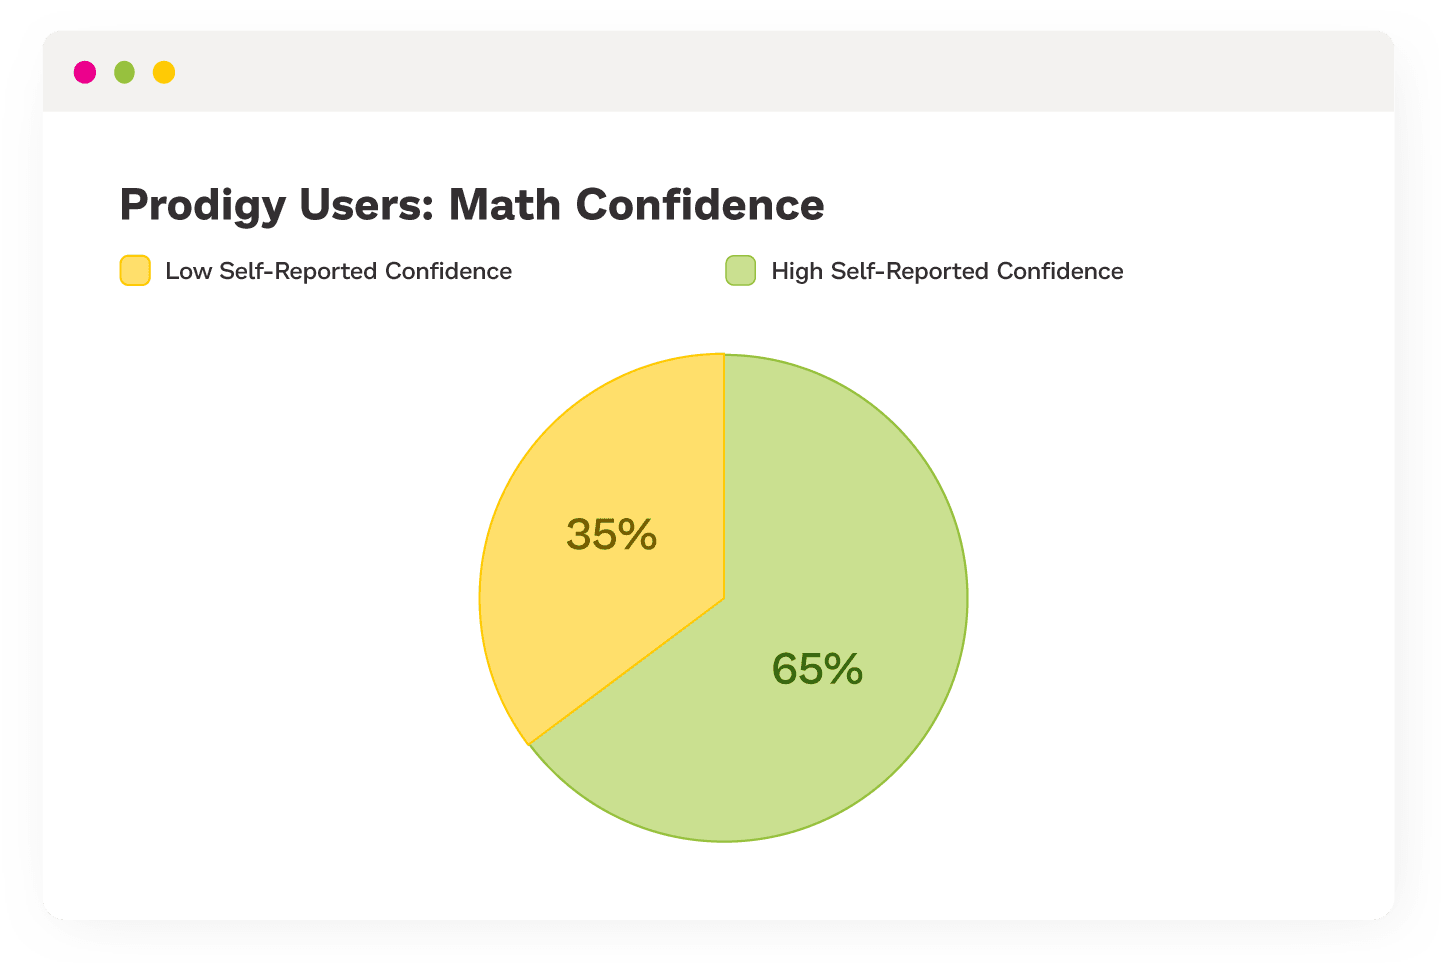 Pie chart showing that 65% of Prodigy users have high self-reported confidence. 